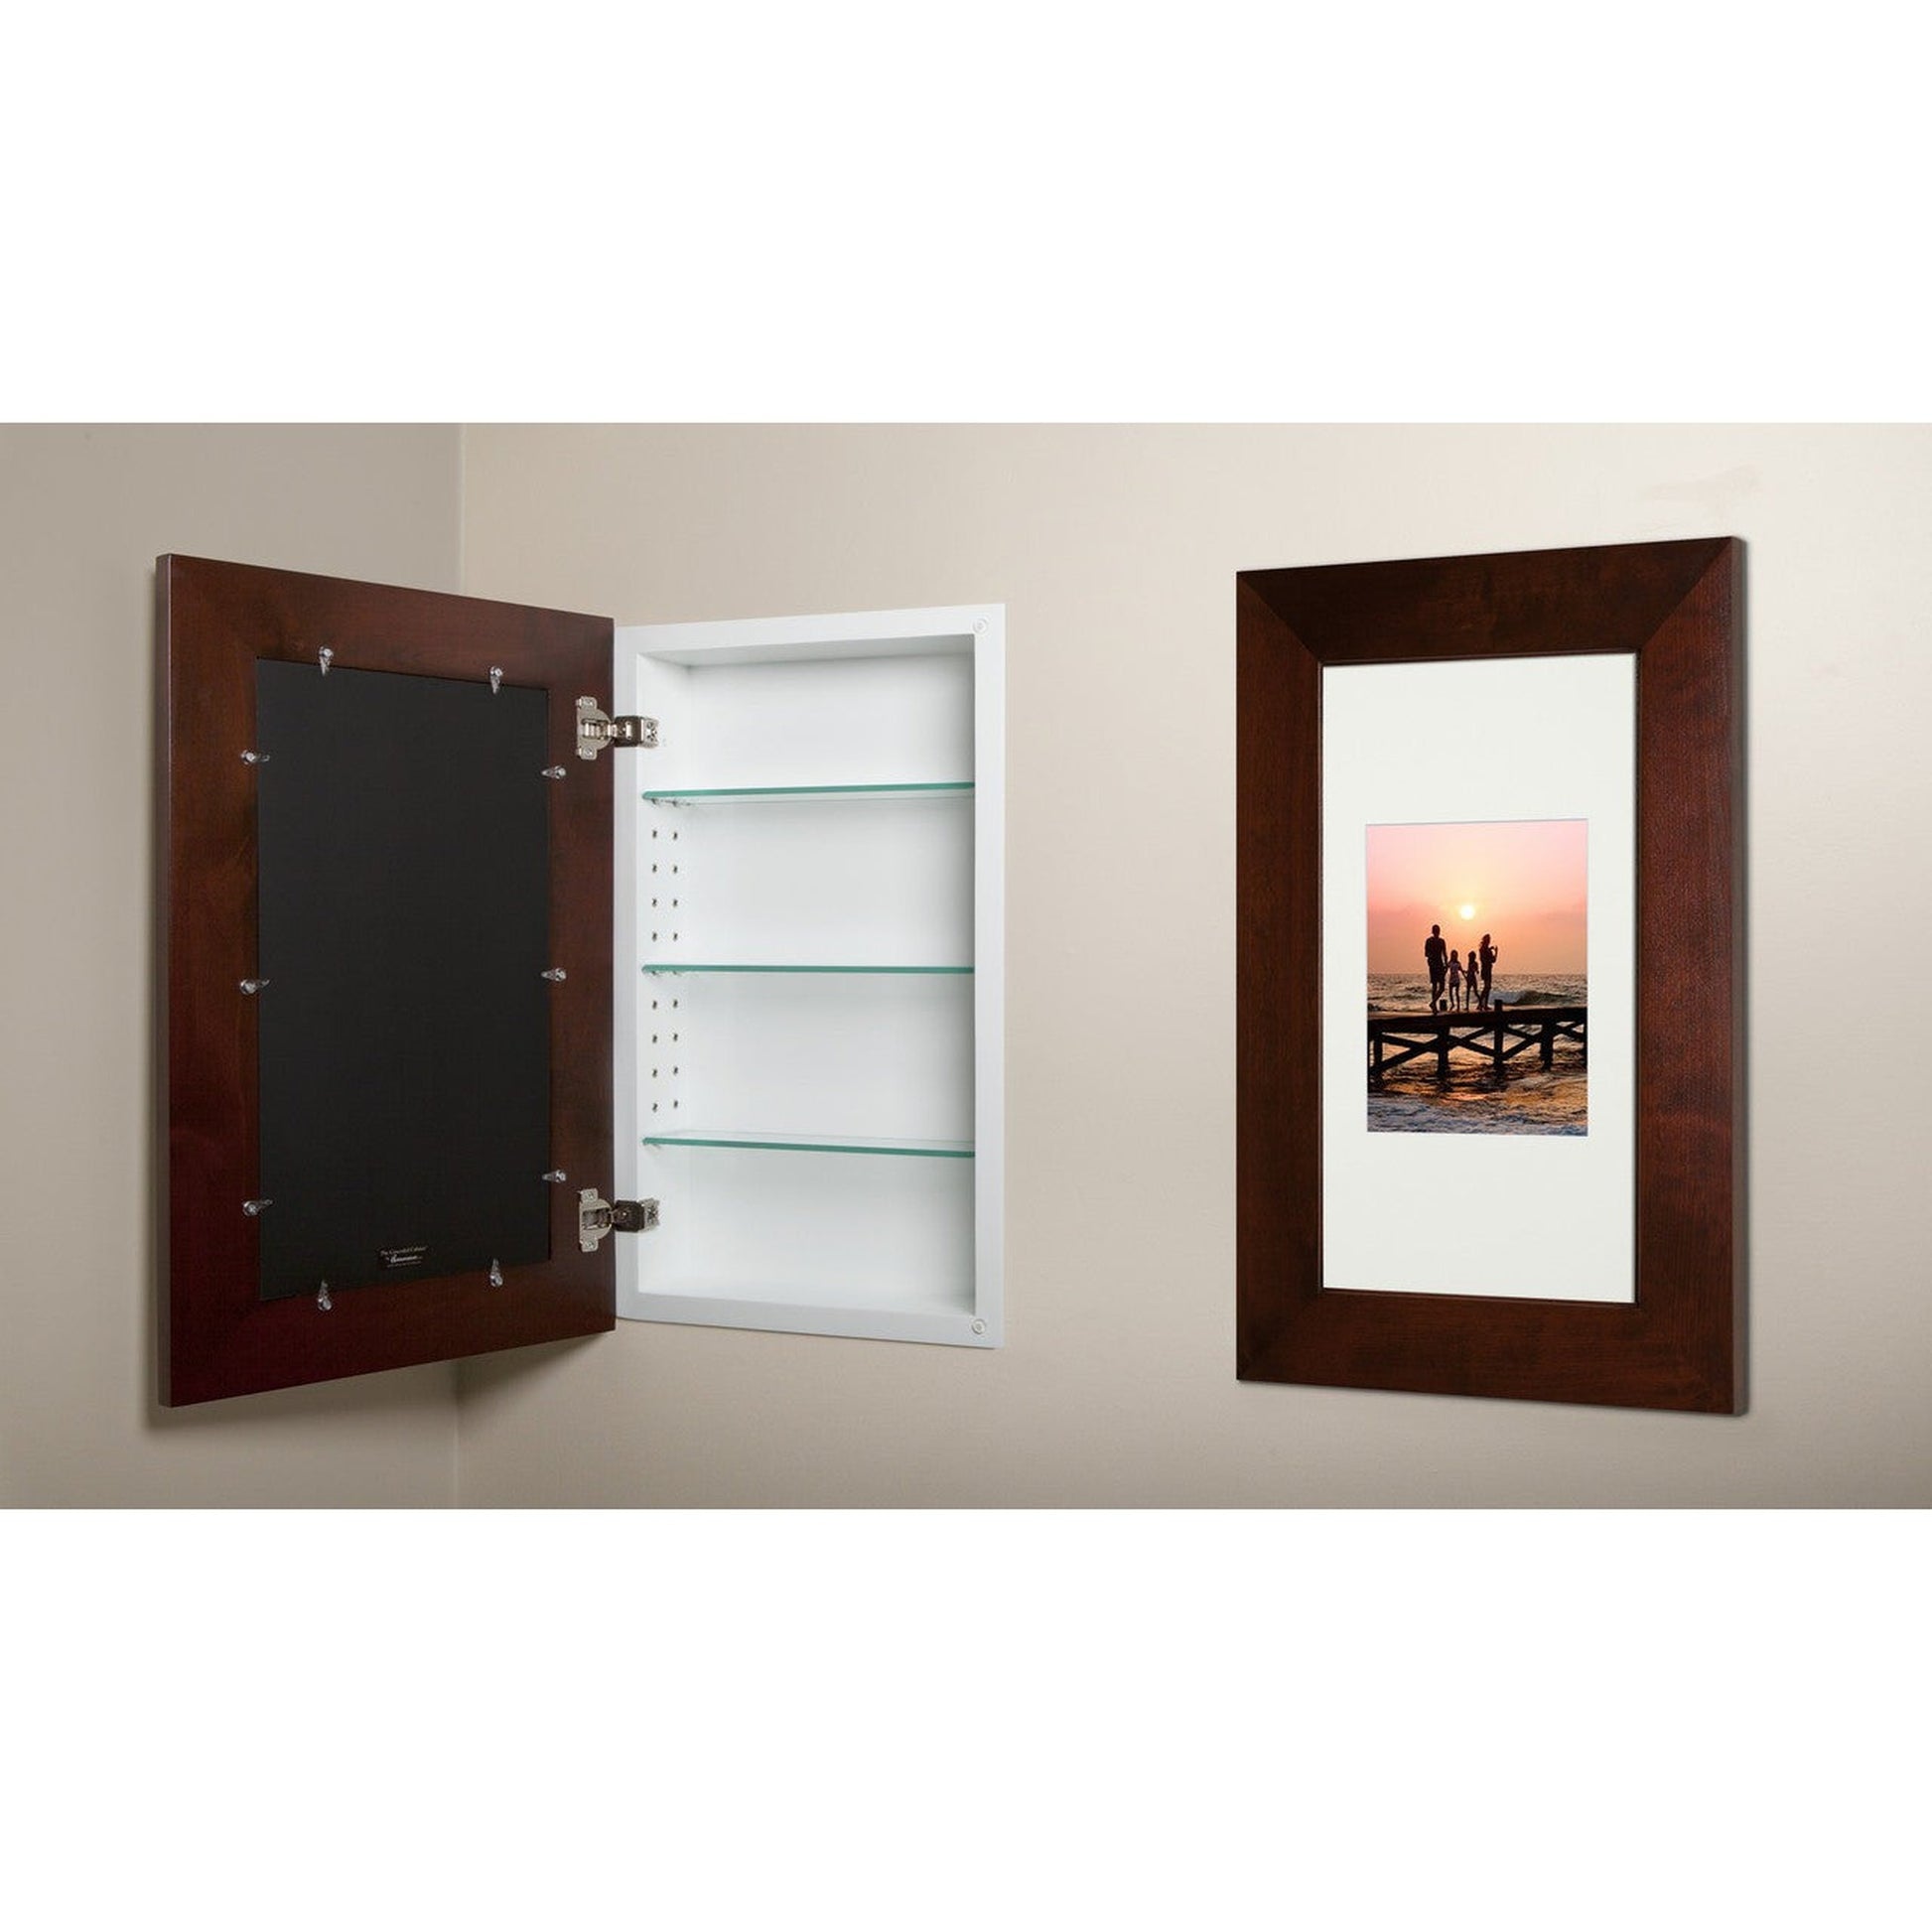 Fox Hollow Furnishings 14" x 24" Espresso Extra Large Standard 3.75" Depth Natural Interior Recessed Picture Frame Medicine Cabinet With Mirror